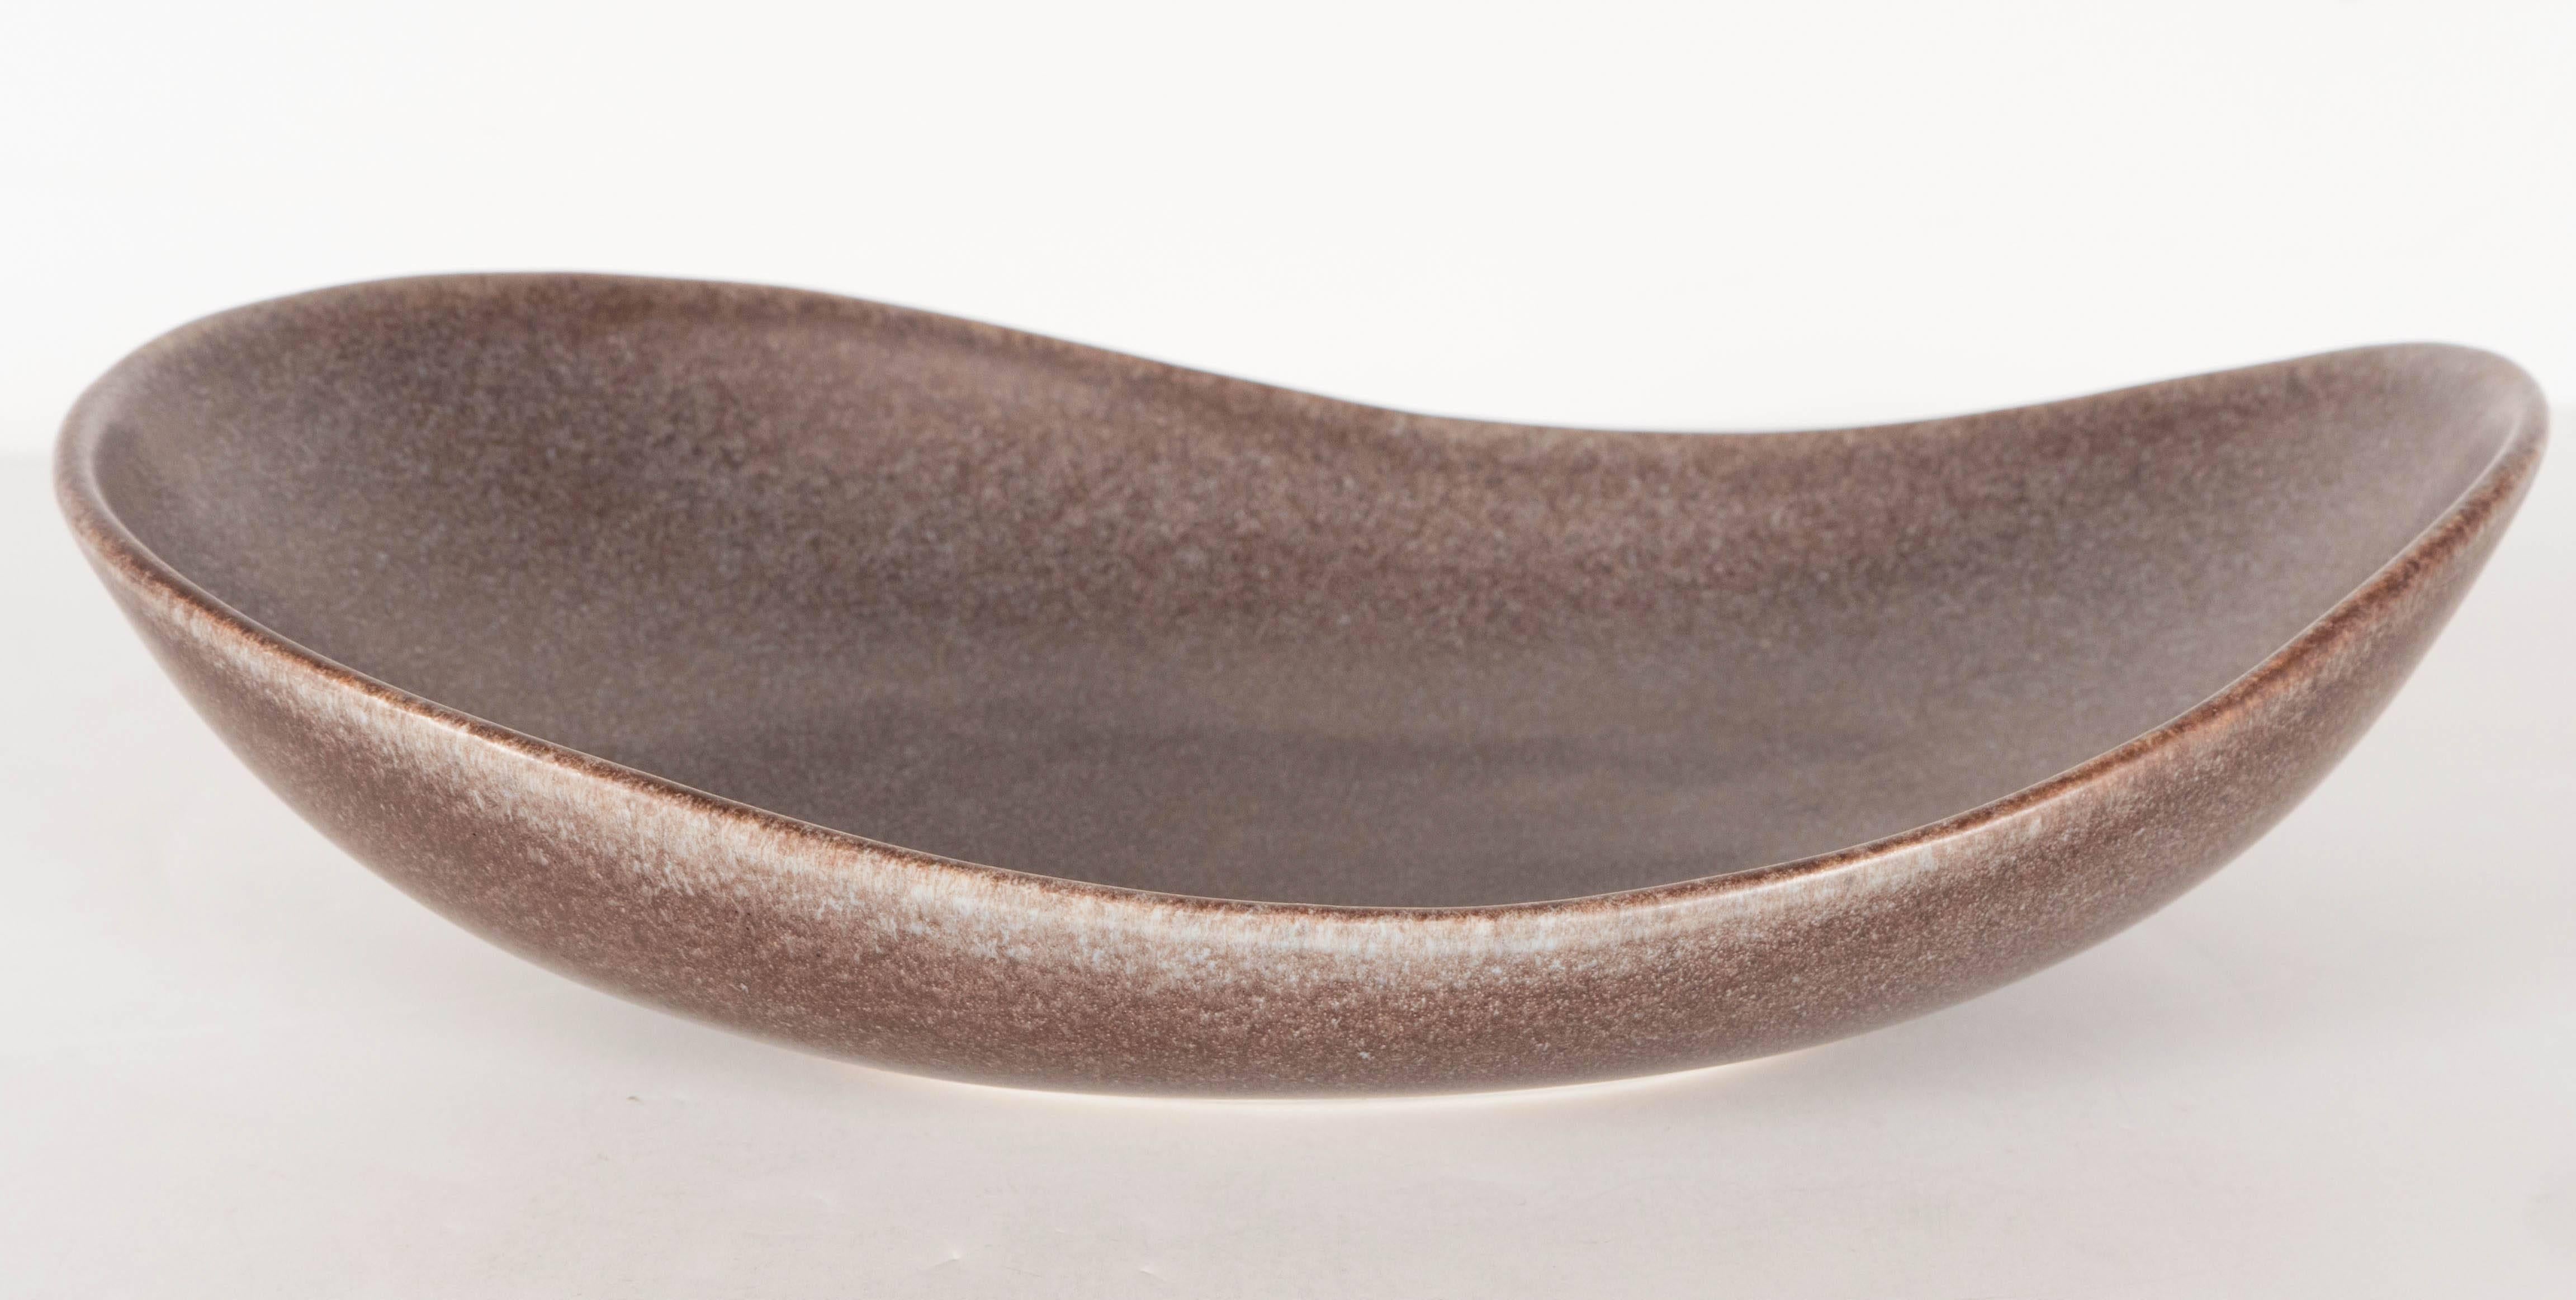  Mid-Century Modernist Ovoid Bowl by Carl-Harry Stålhane for Rörstrand 2